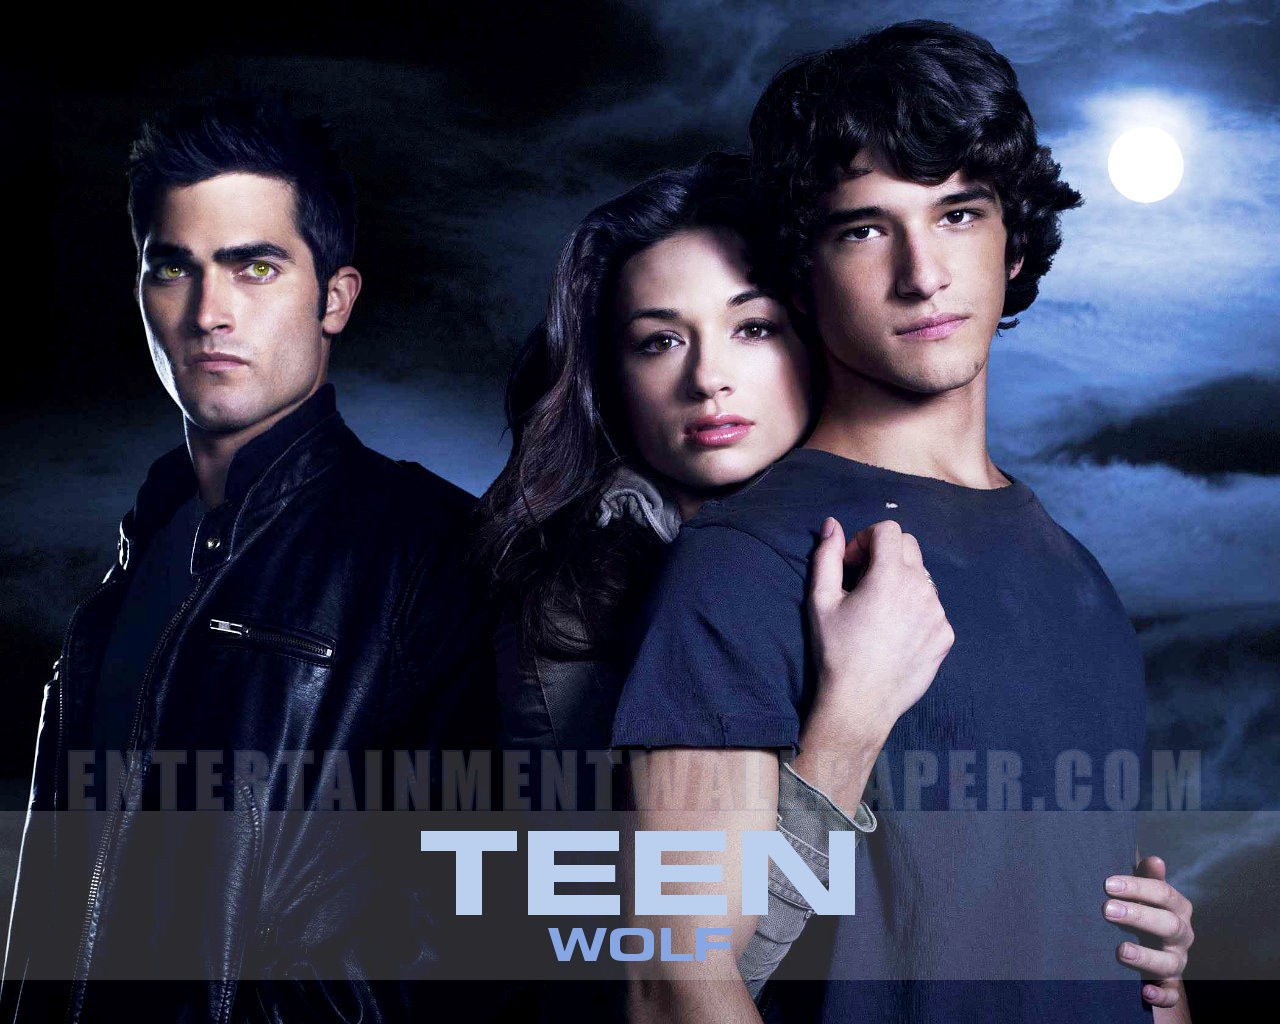 Teen Wolf HD Wallpaper Check Out The Cool